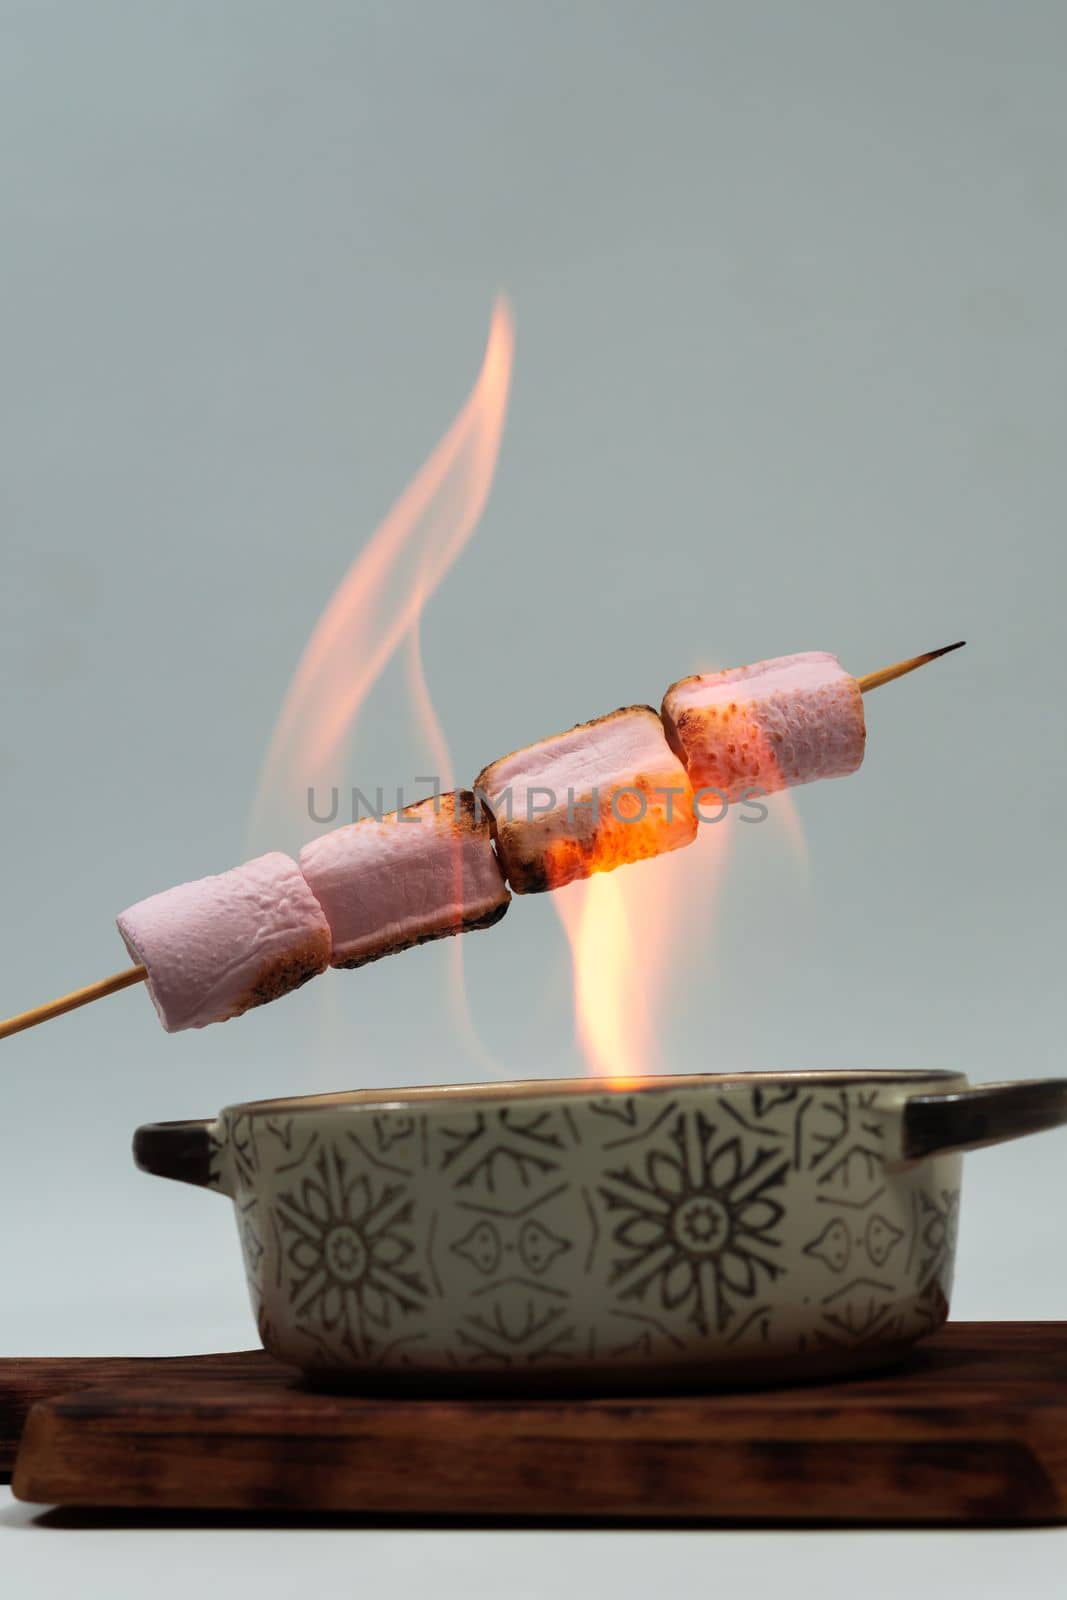 skewer of sweet marshmallows warming on the fire